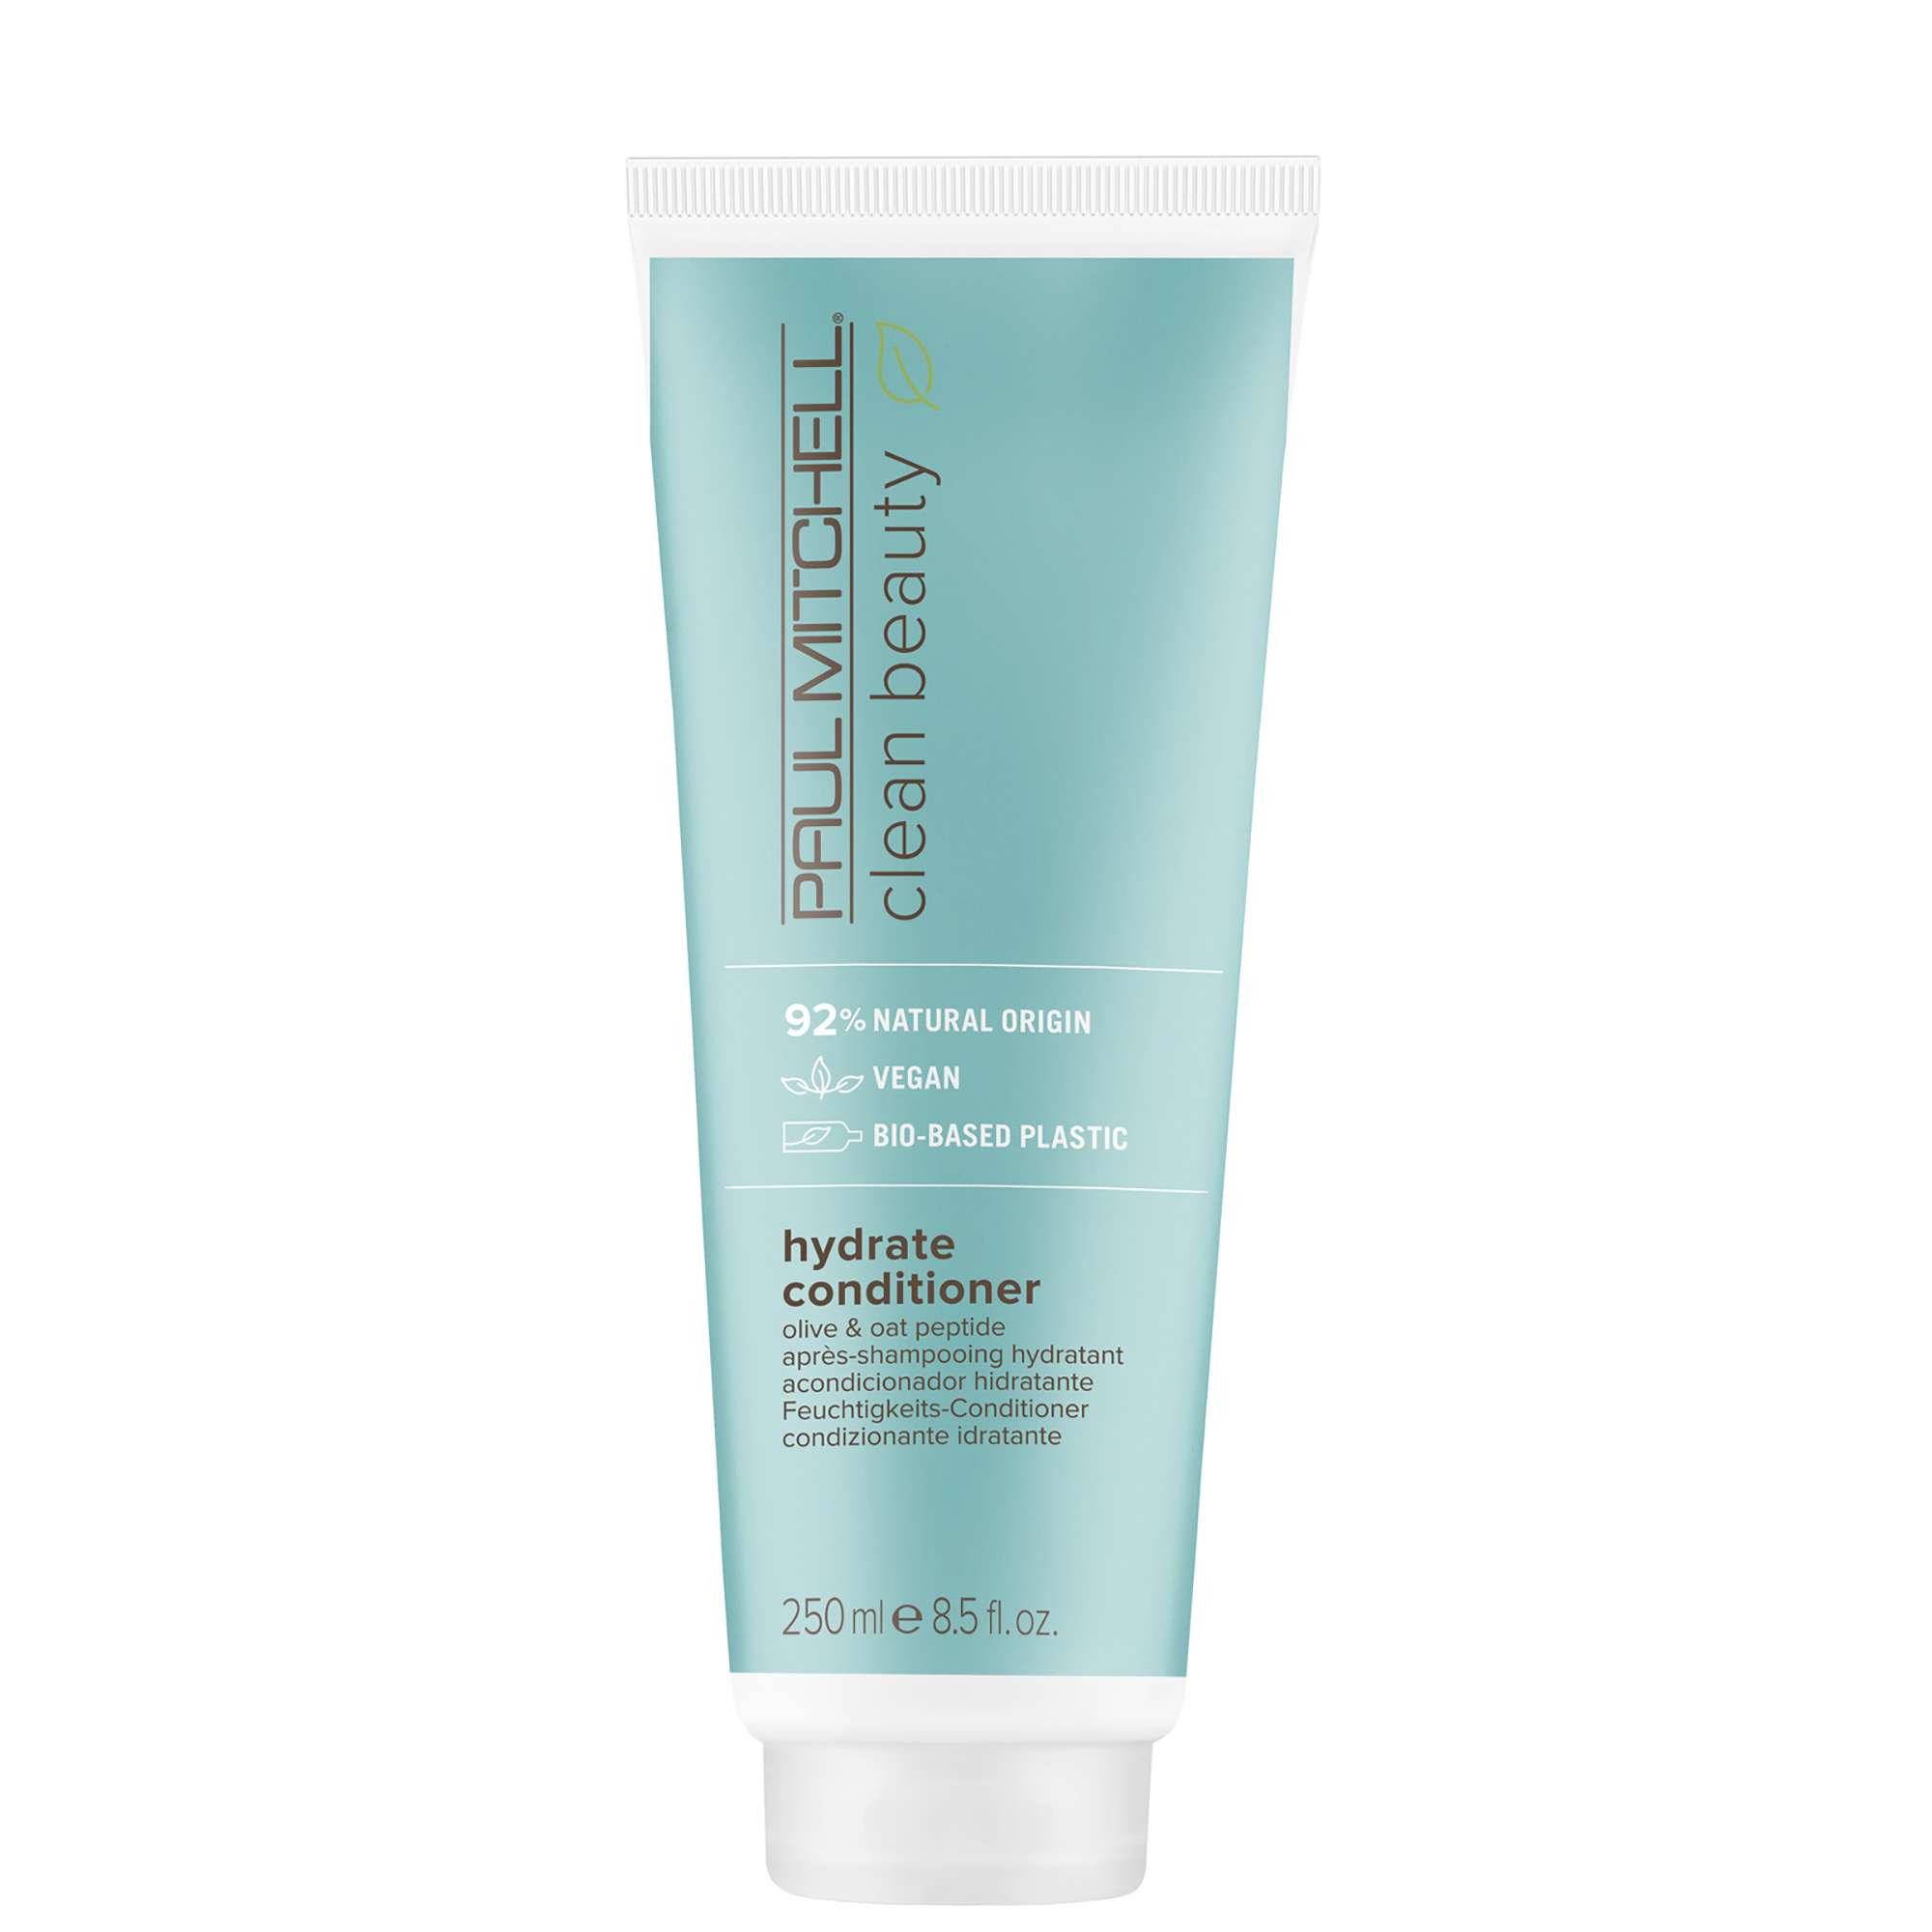 Photos - Hair Product Paul Mitchell Clean Beauty Hydrate Conditioner 250ml 